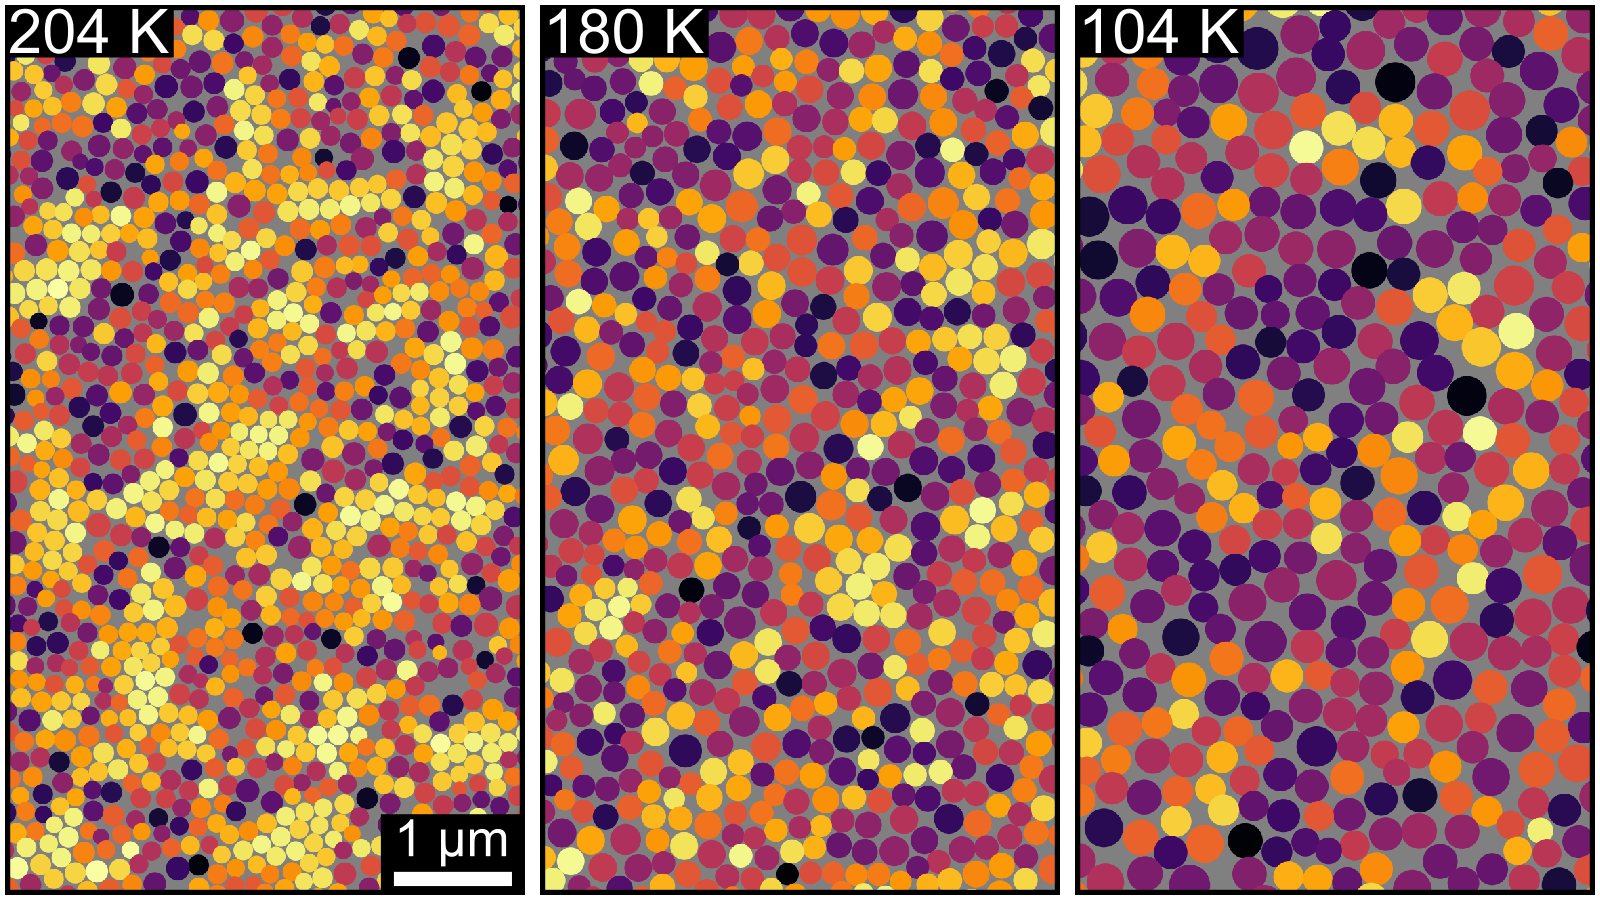 Multicolor dots in three rectangles. (Image by Argonne National Laboratory.)